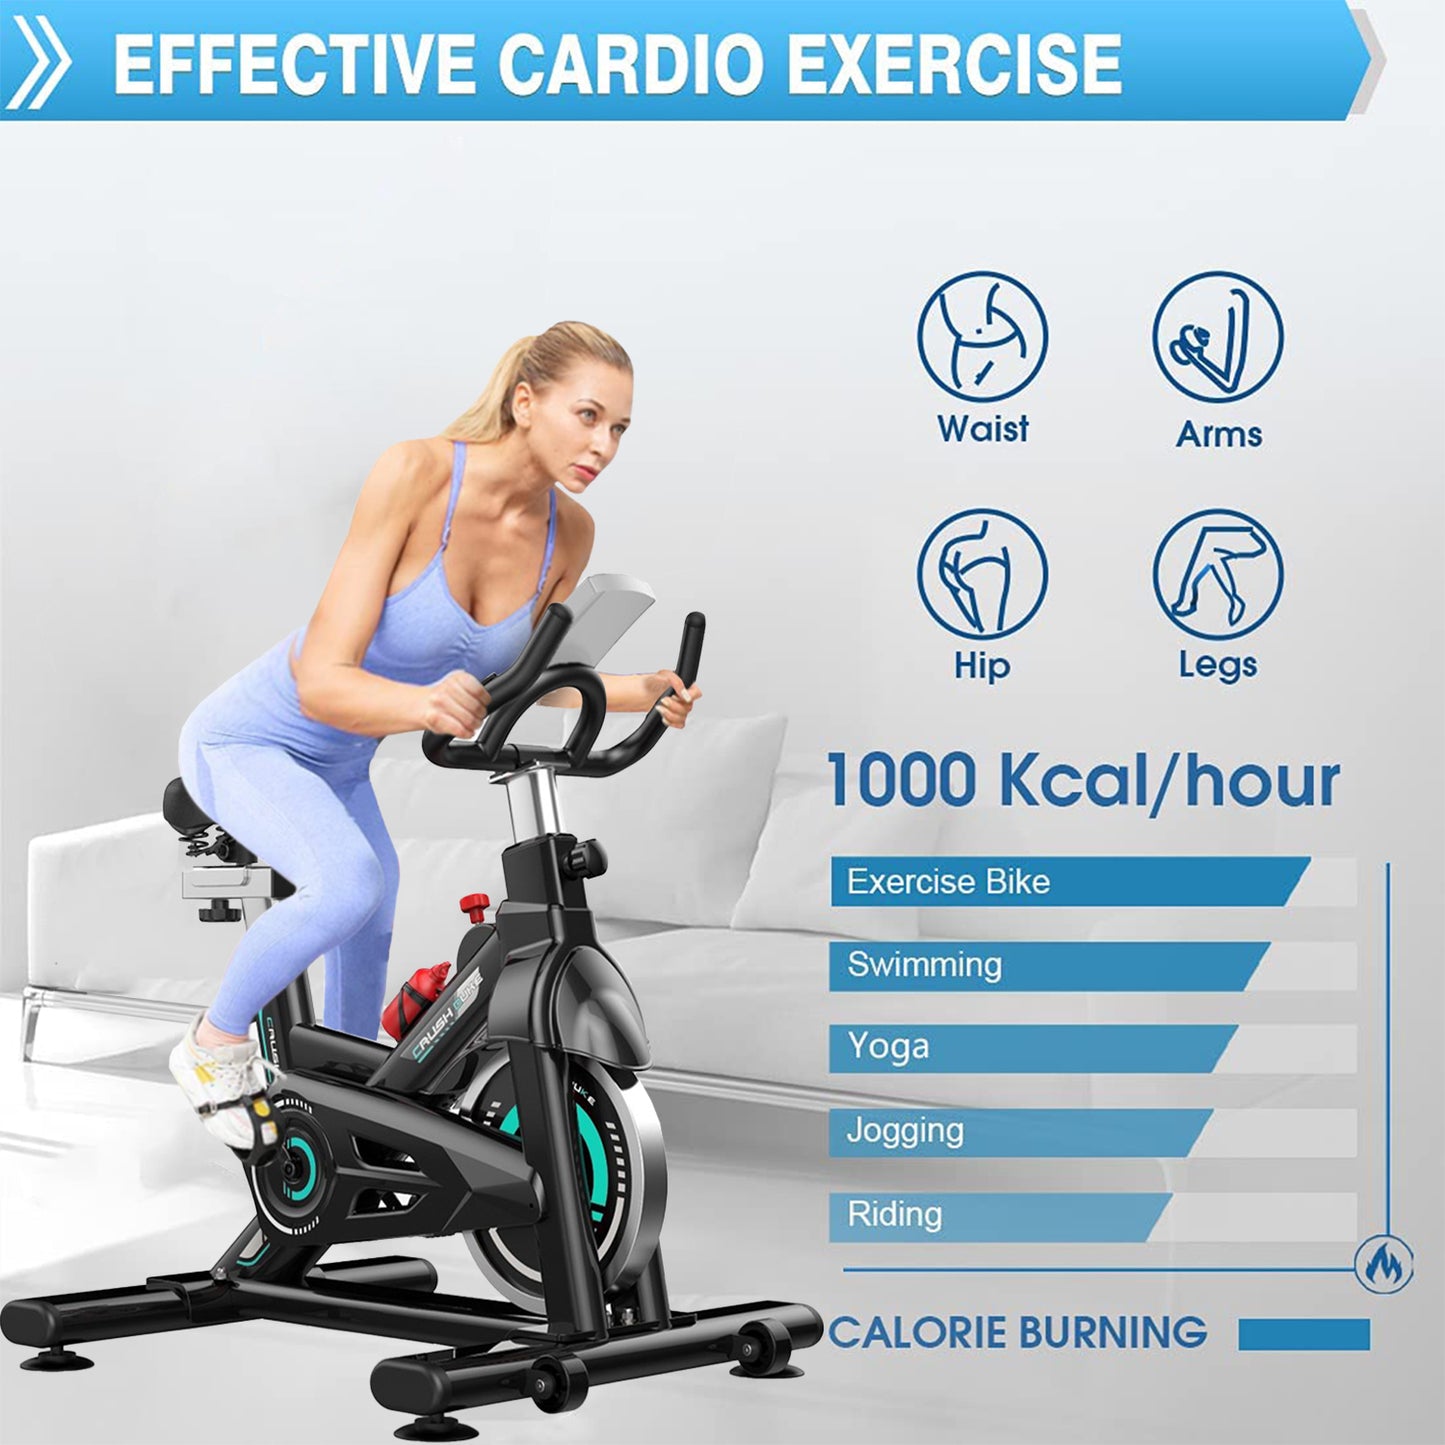 Indoor Stationary Exercise Cycling Training Bike for Home